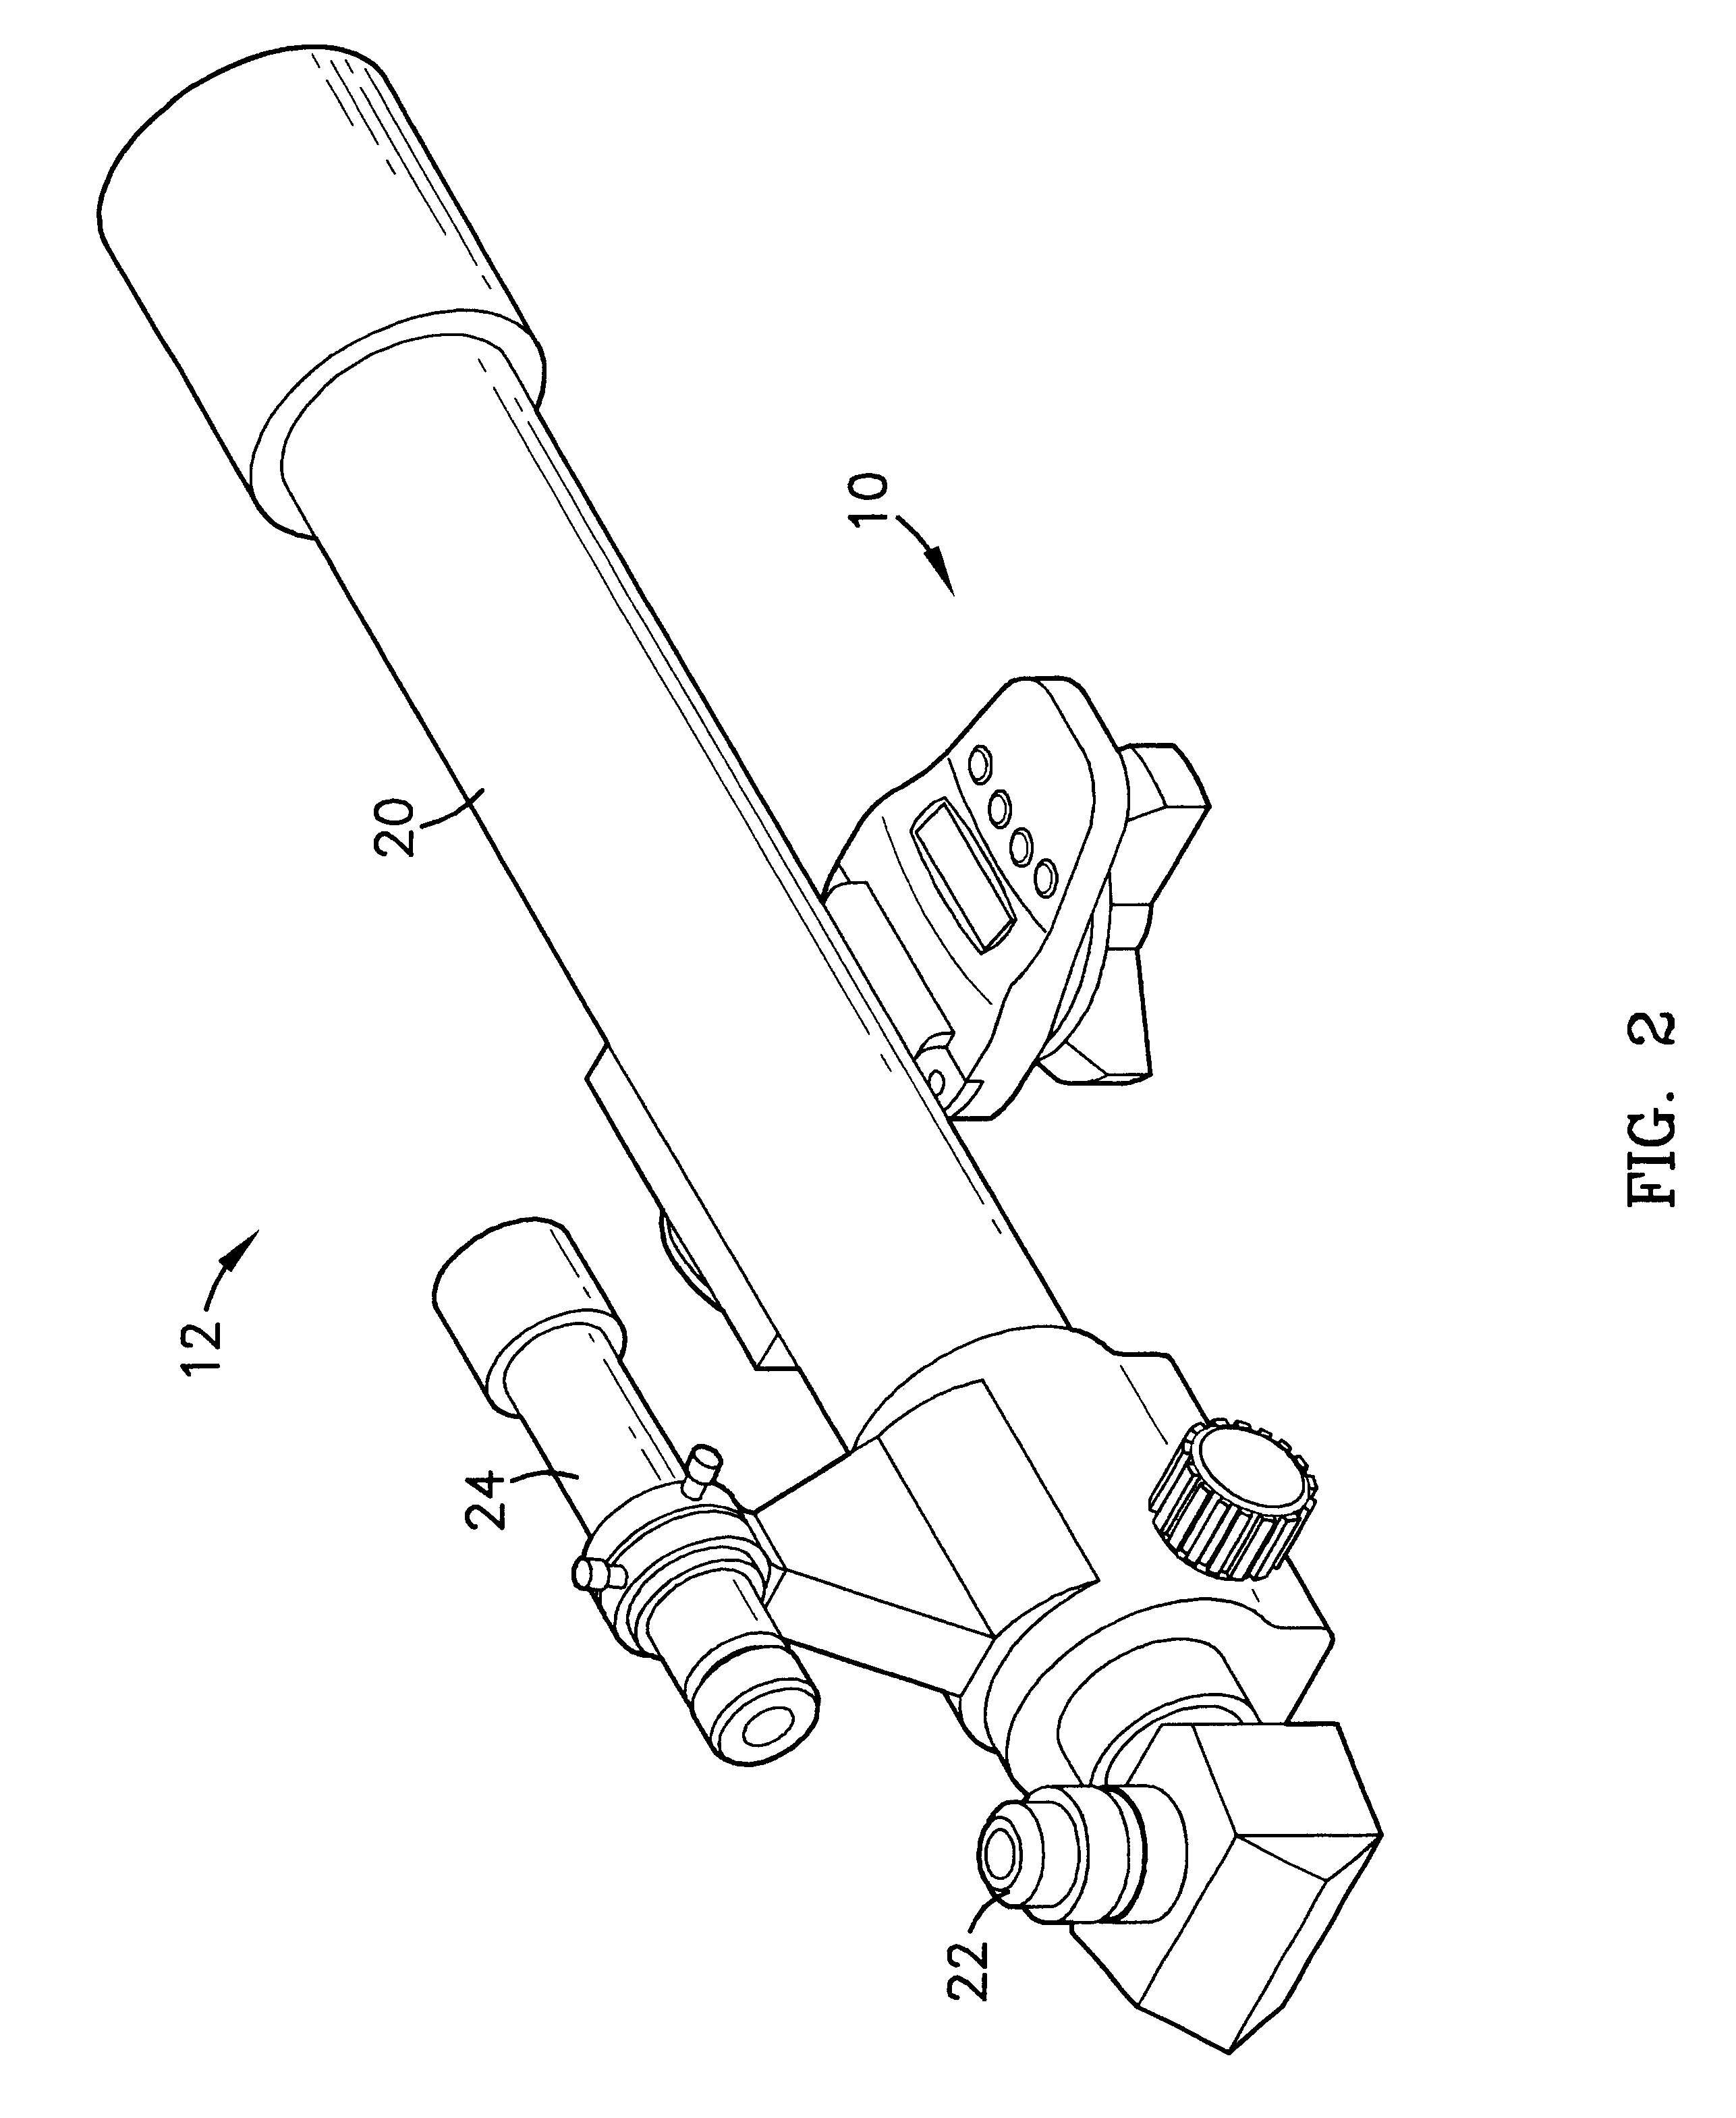 Portable telescope mount with integral locator using magnetic encoders for facilitating location of objects and positioning of a telescope